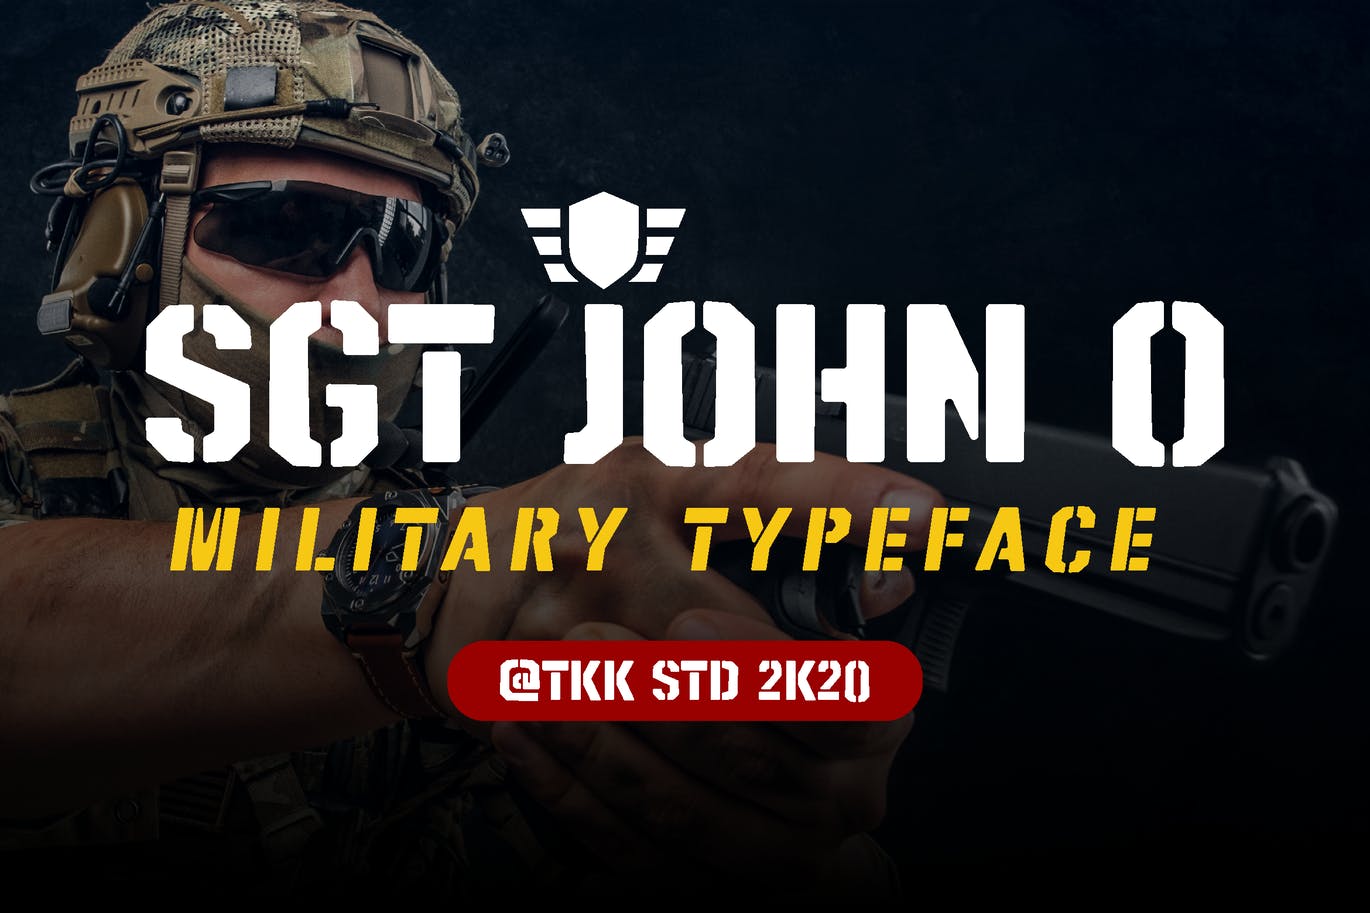 A true military typeface